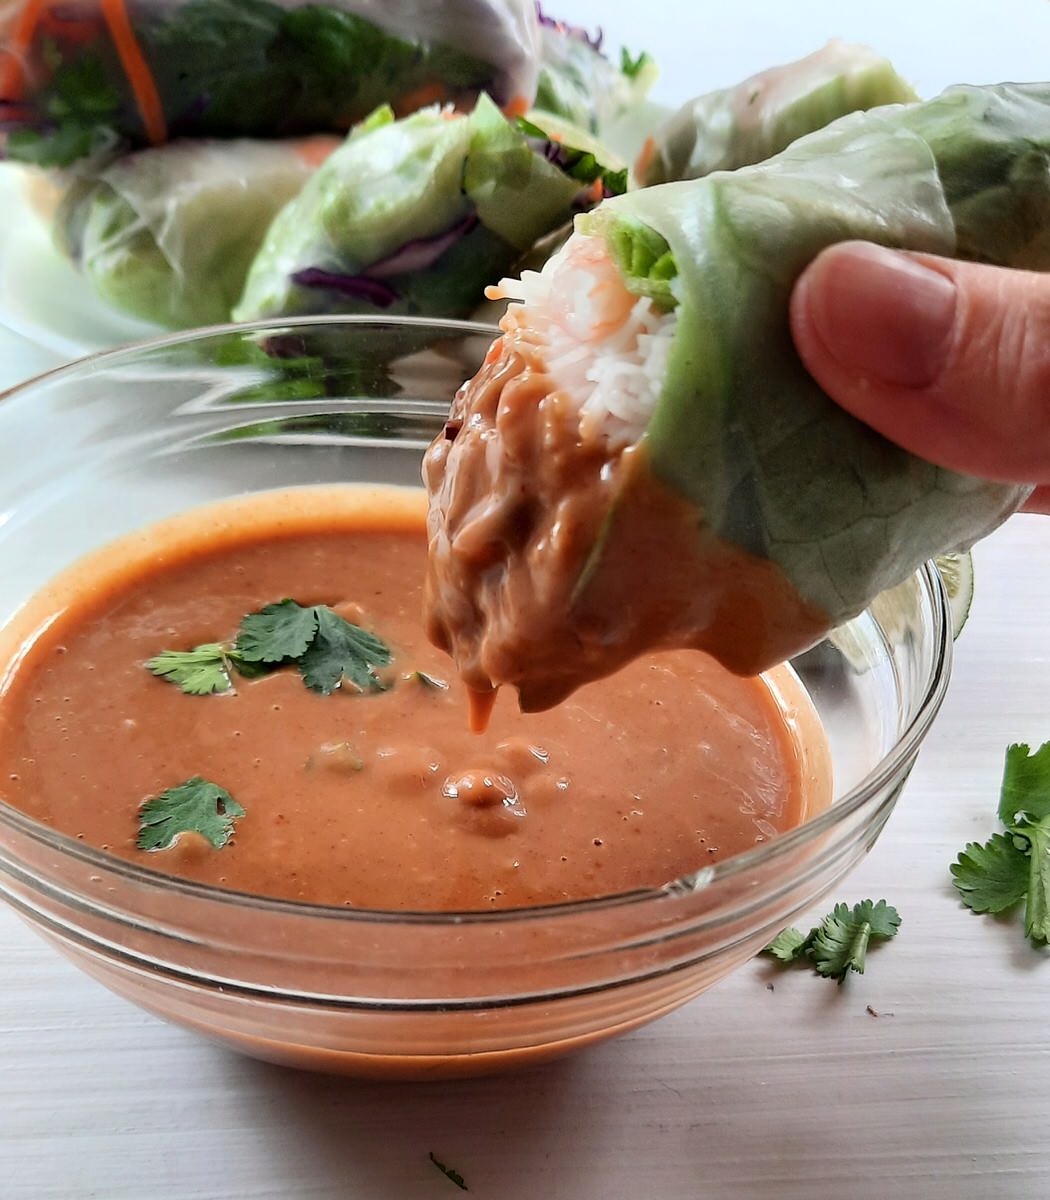 a hand dips half of a fresh spring roll into a bowl of peanut dipping sauce